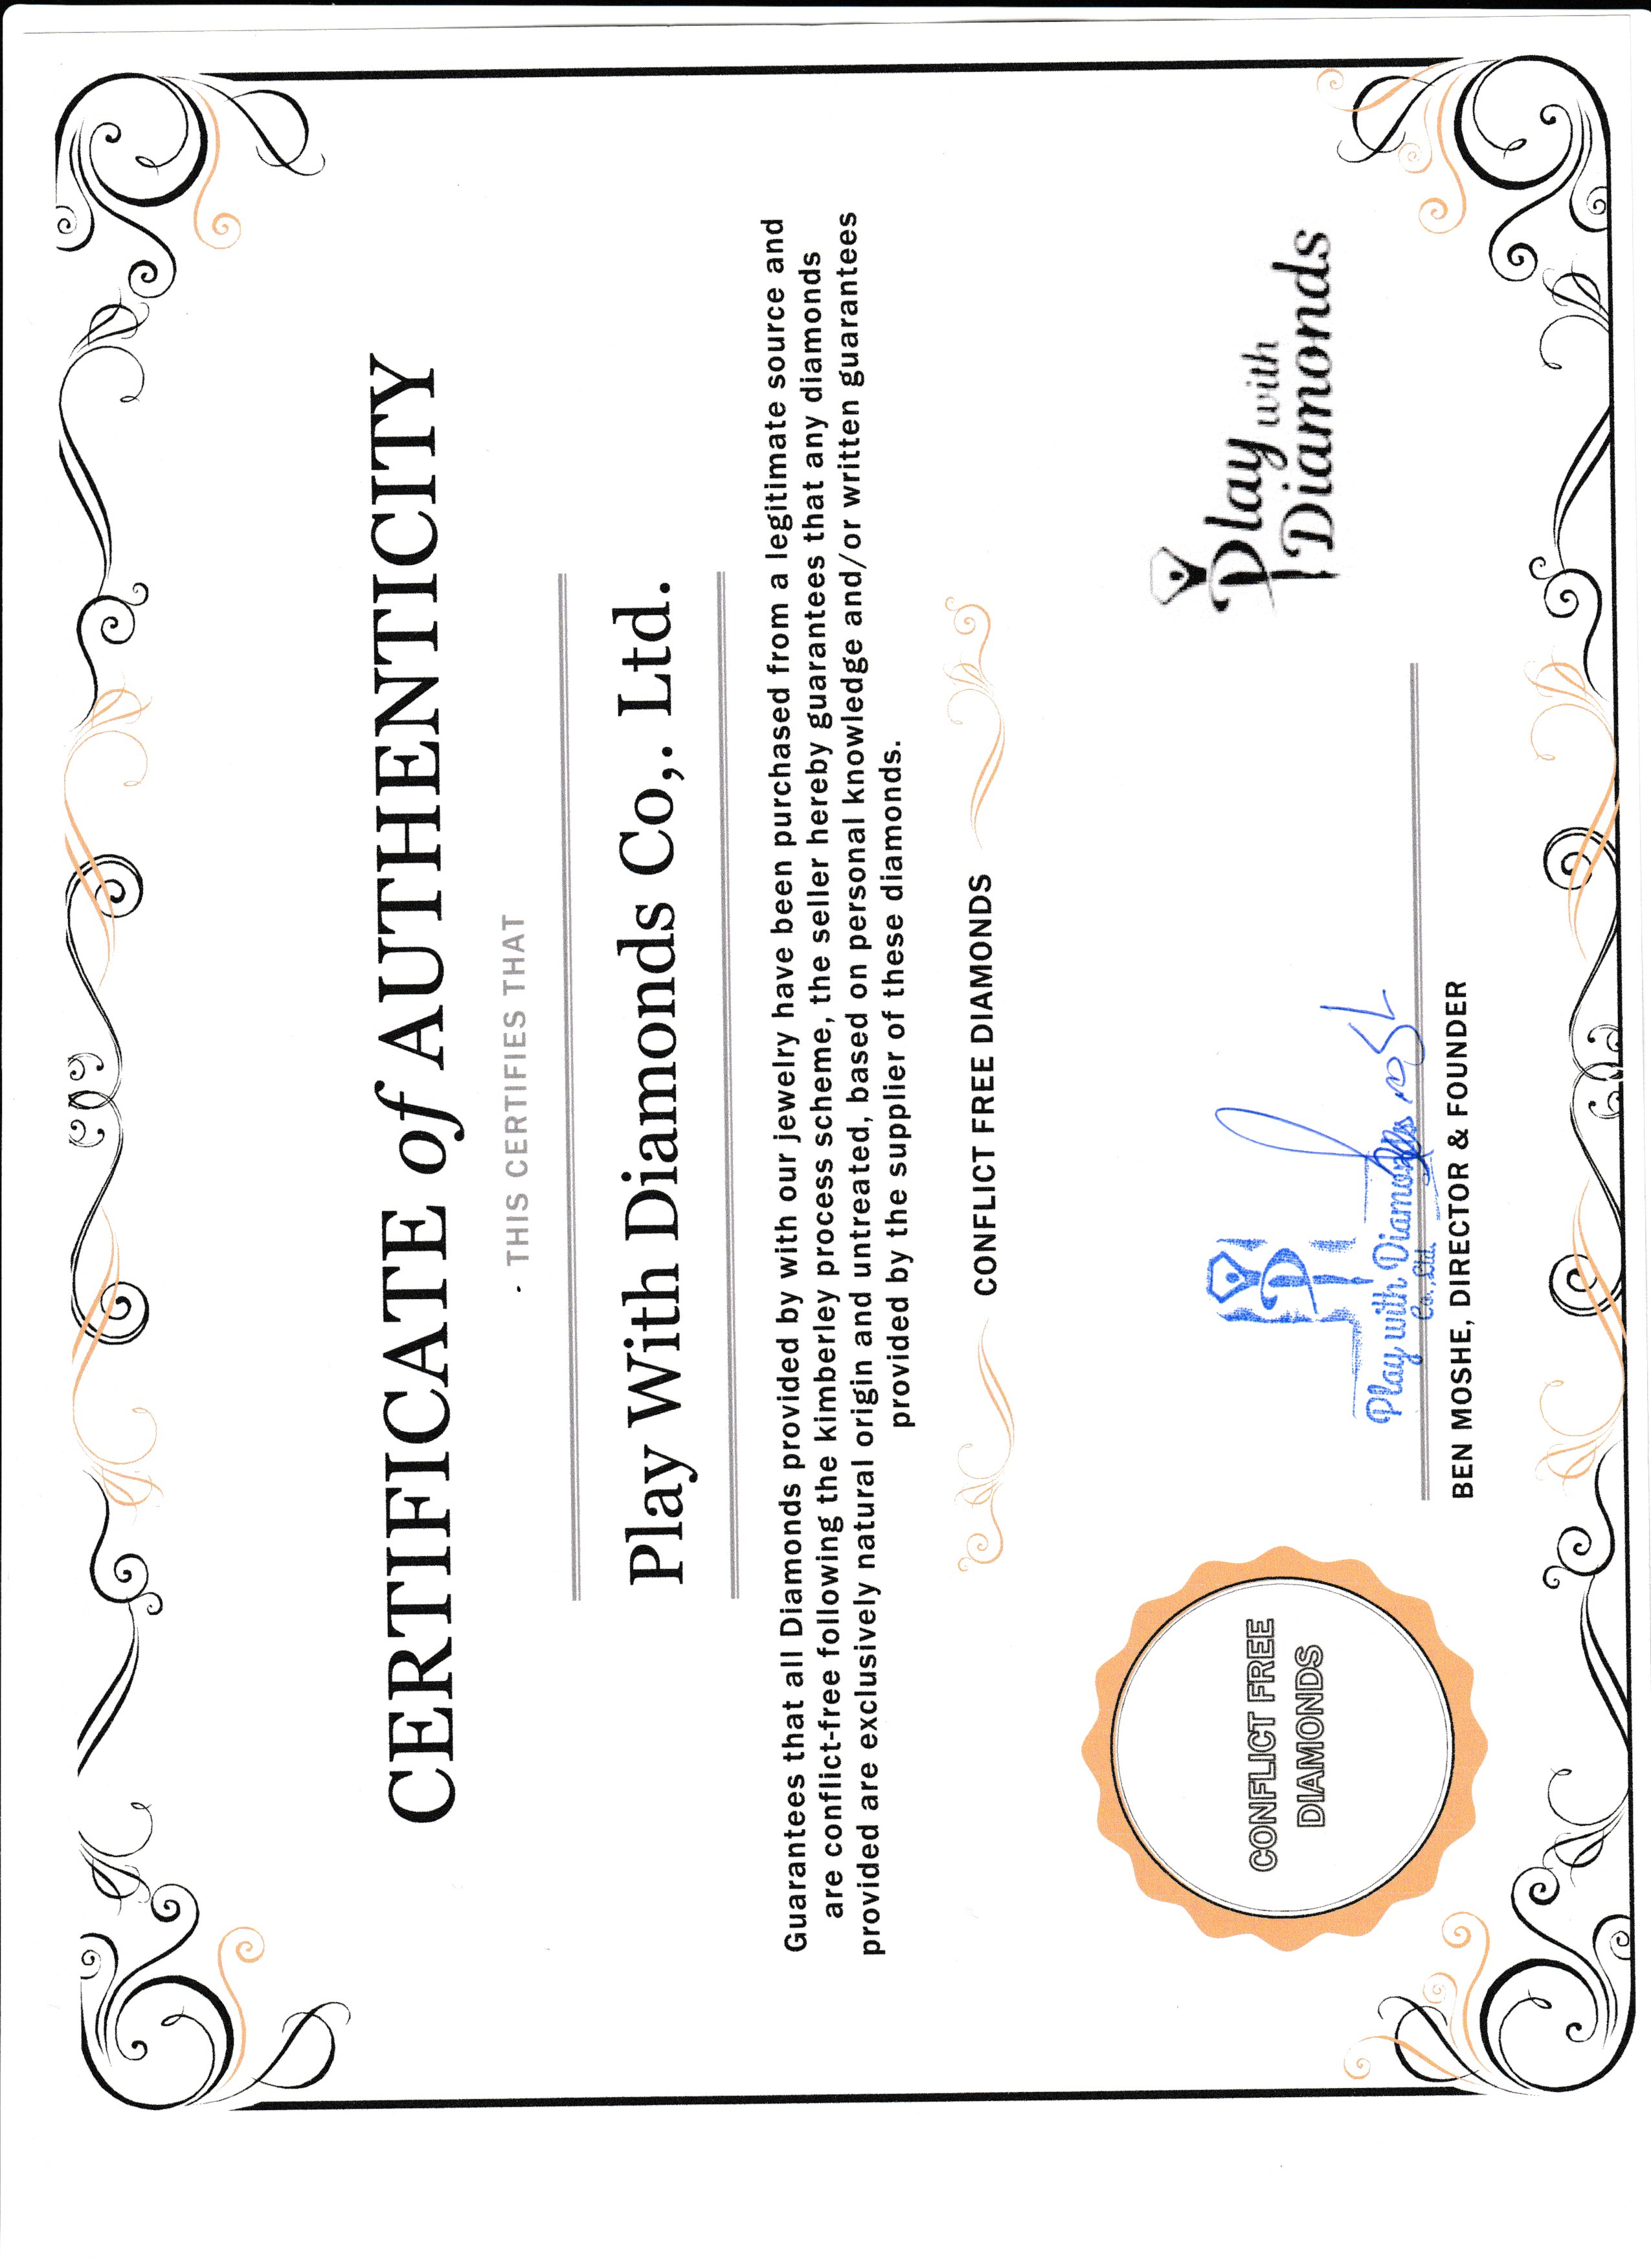 certificate of authenticity